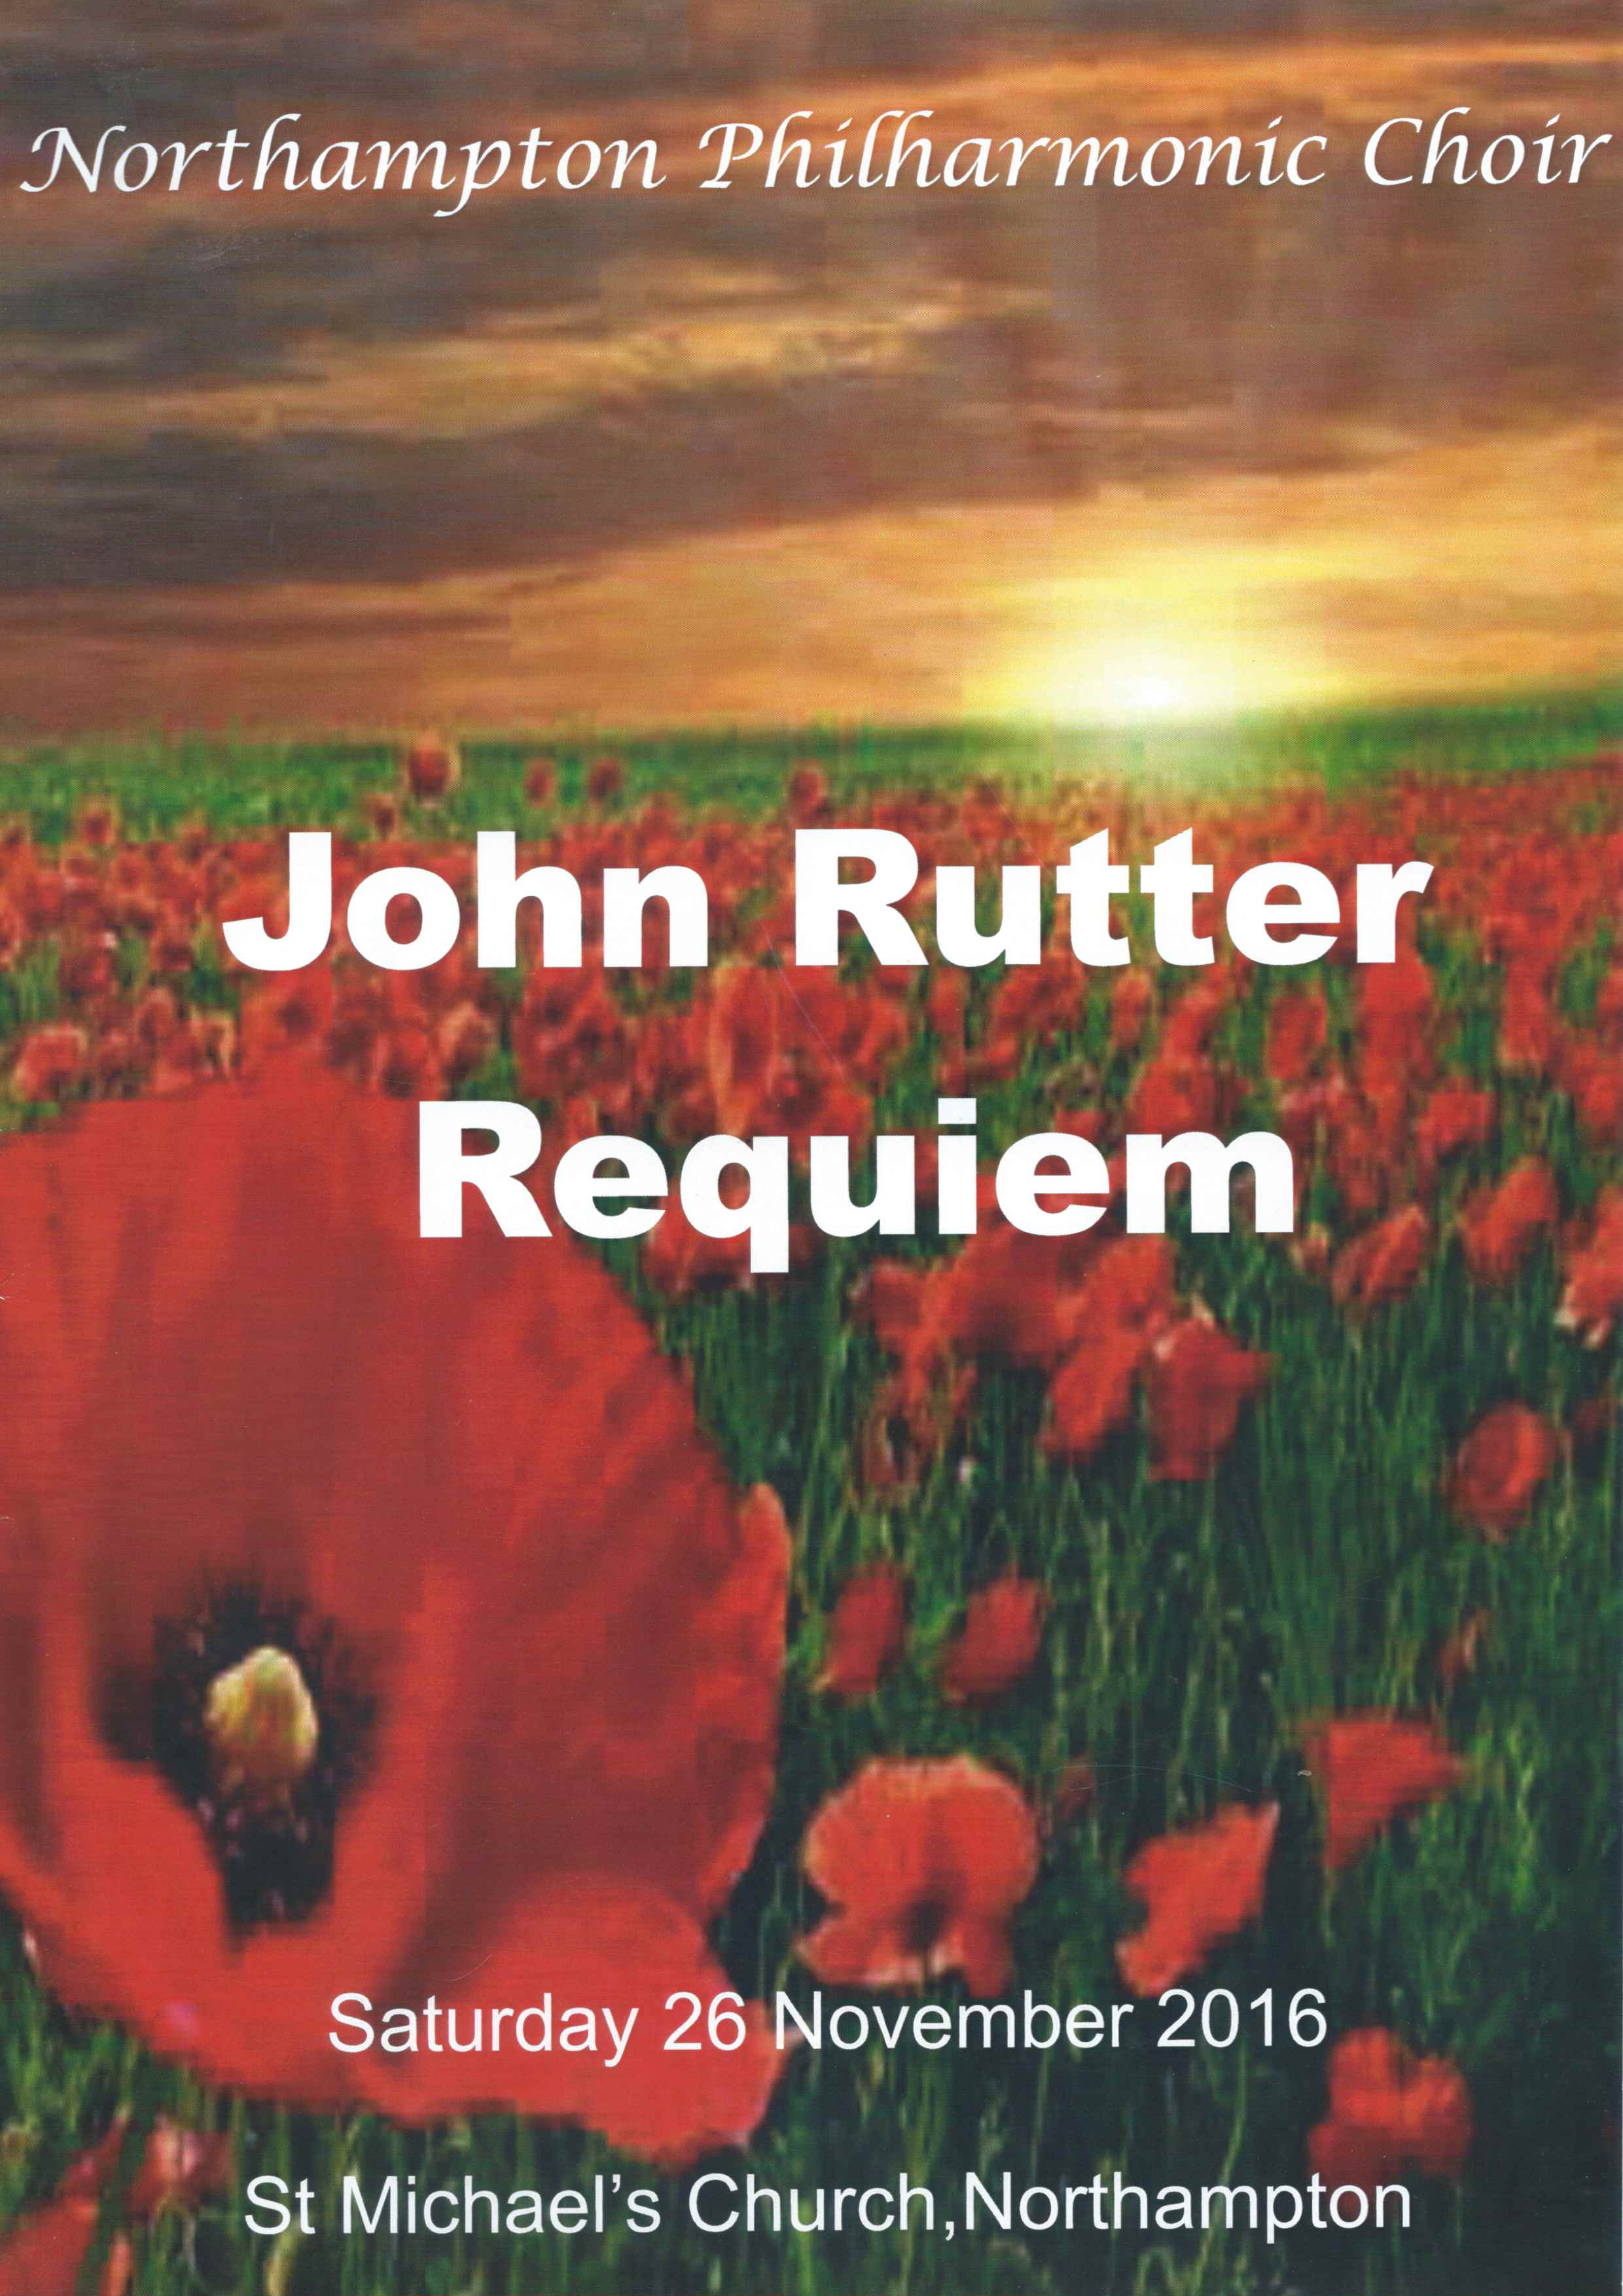 A Northampton Choral Performance of John Rutter Requiem at St Michael's Church in November of 2016